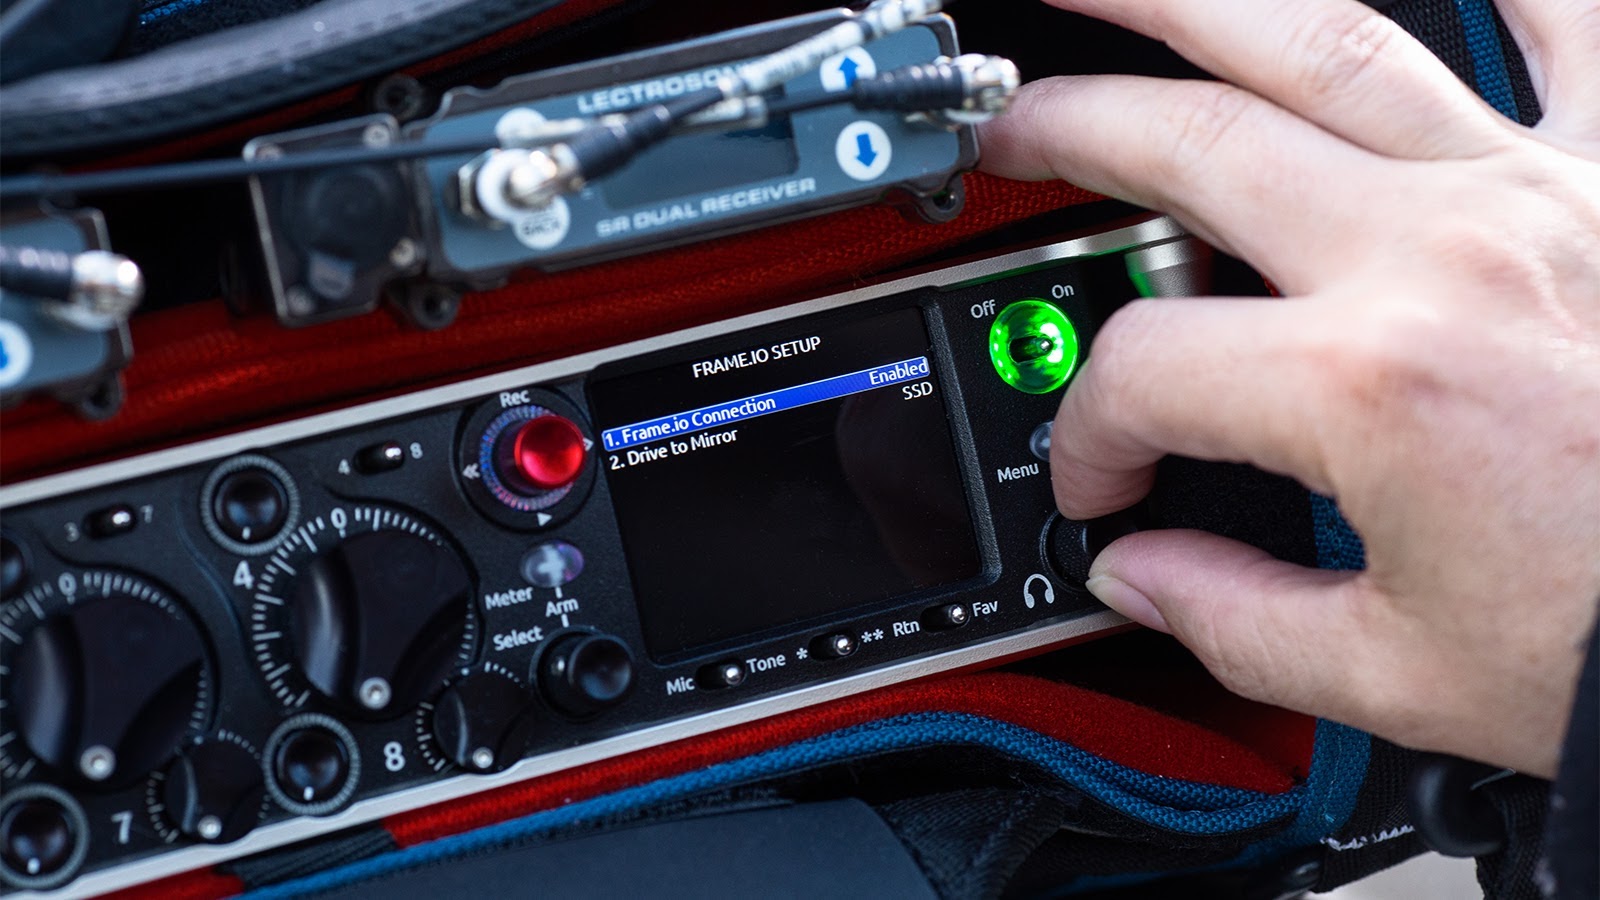 Sound Devices 888 connecting to Frame.io